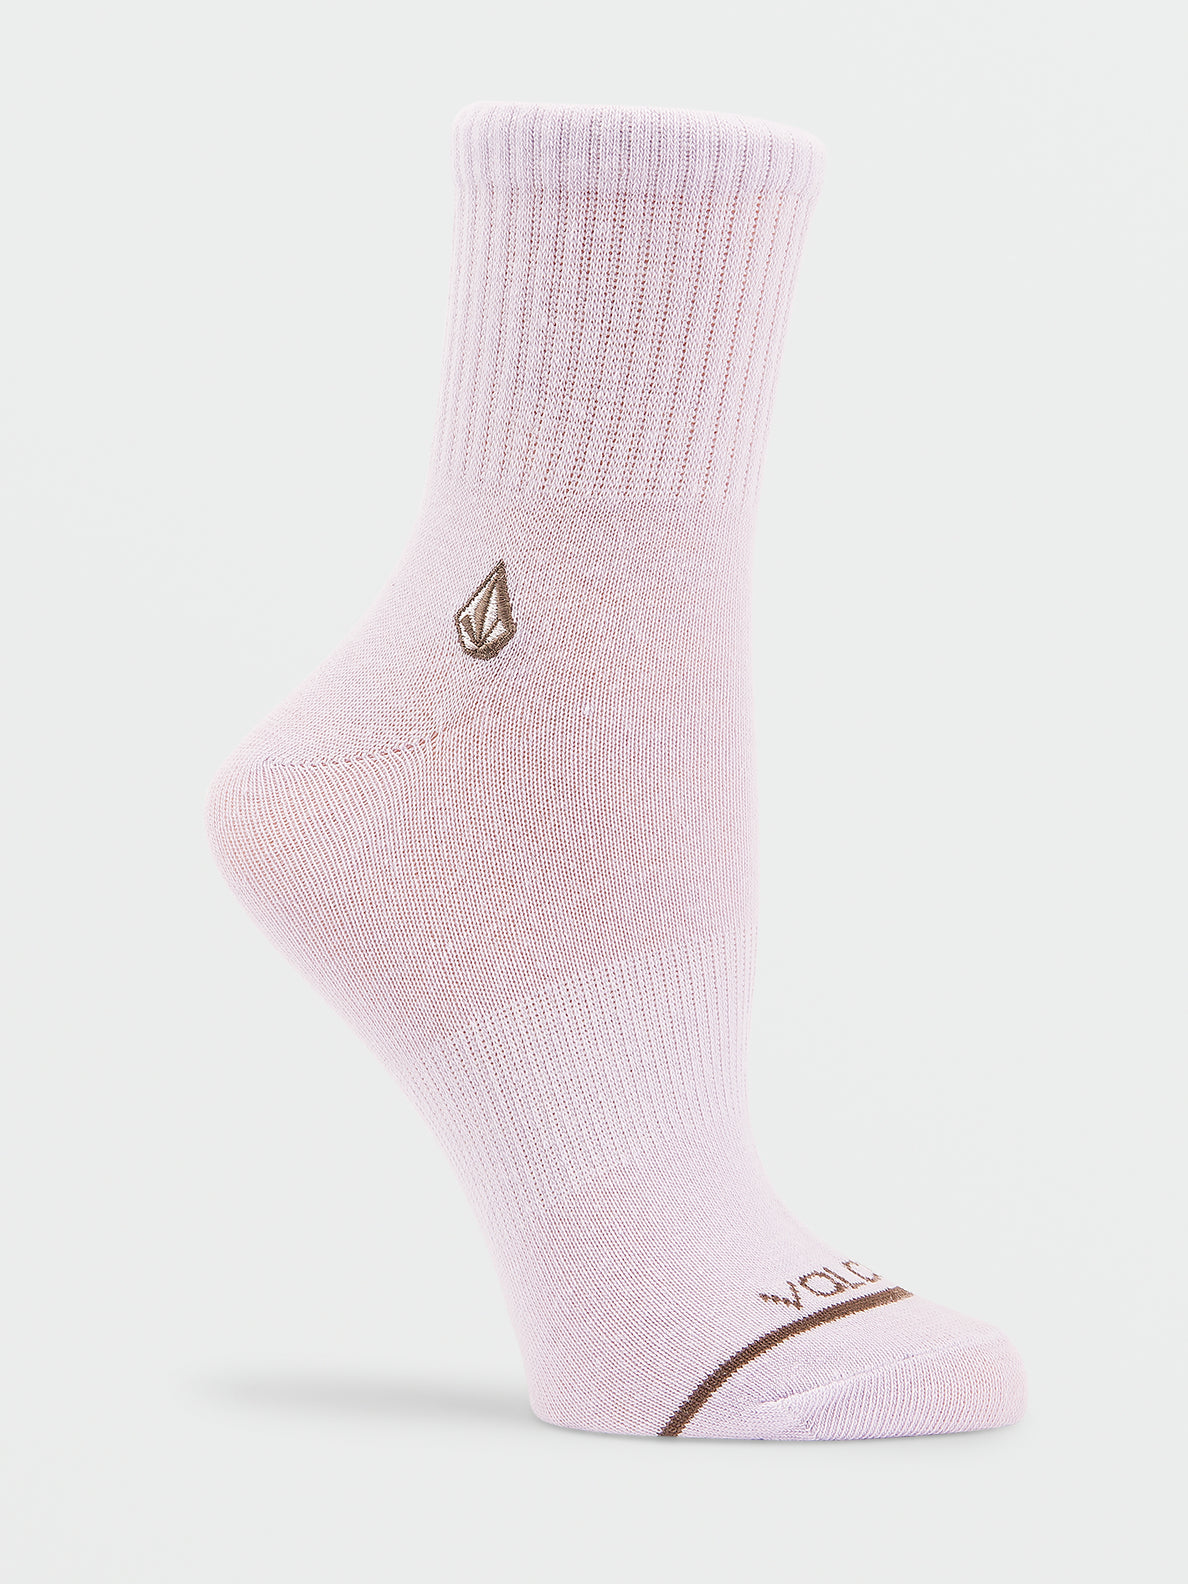 The New Crew Socks 3 Pack - Assorted Colors (E6332200_AST) [7]